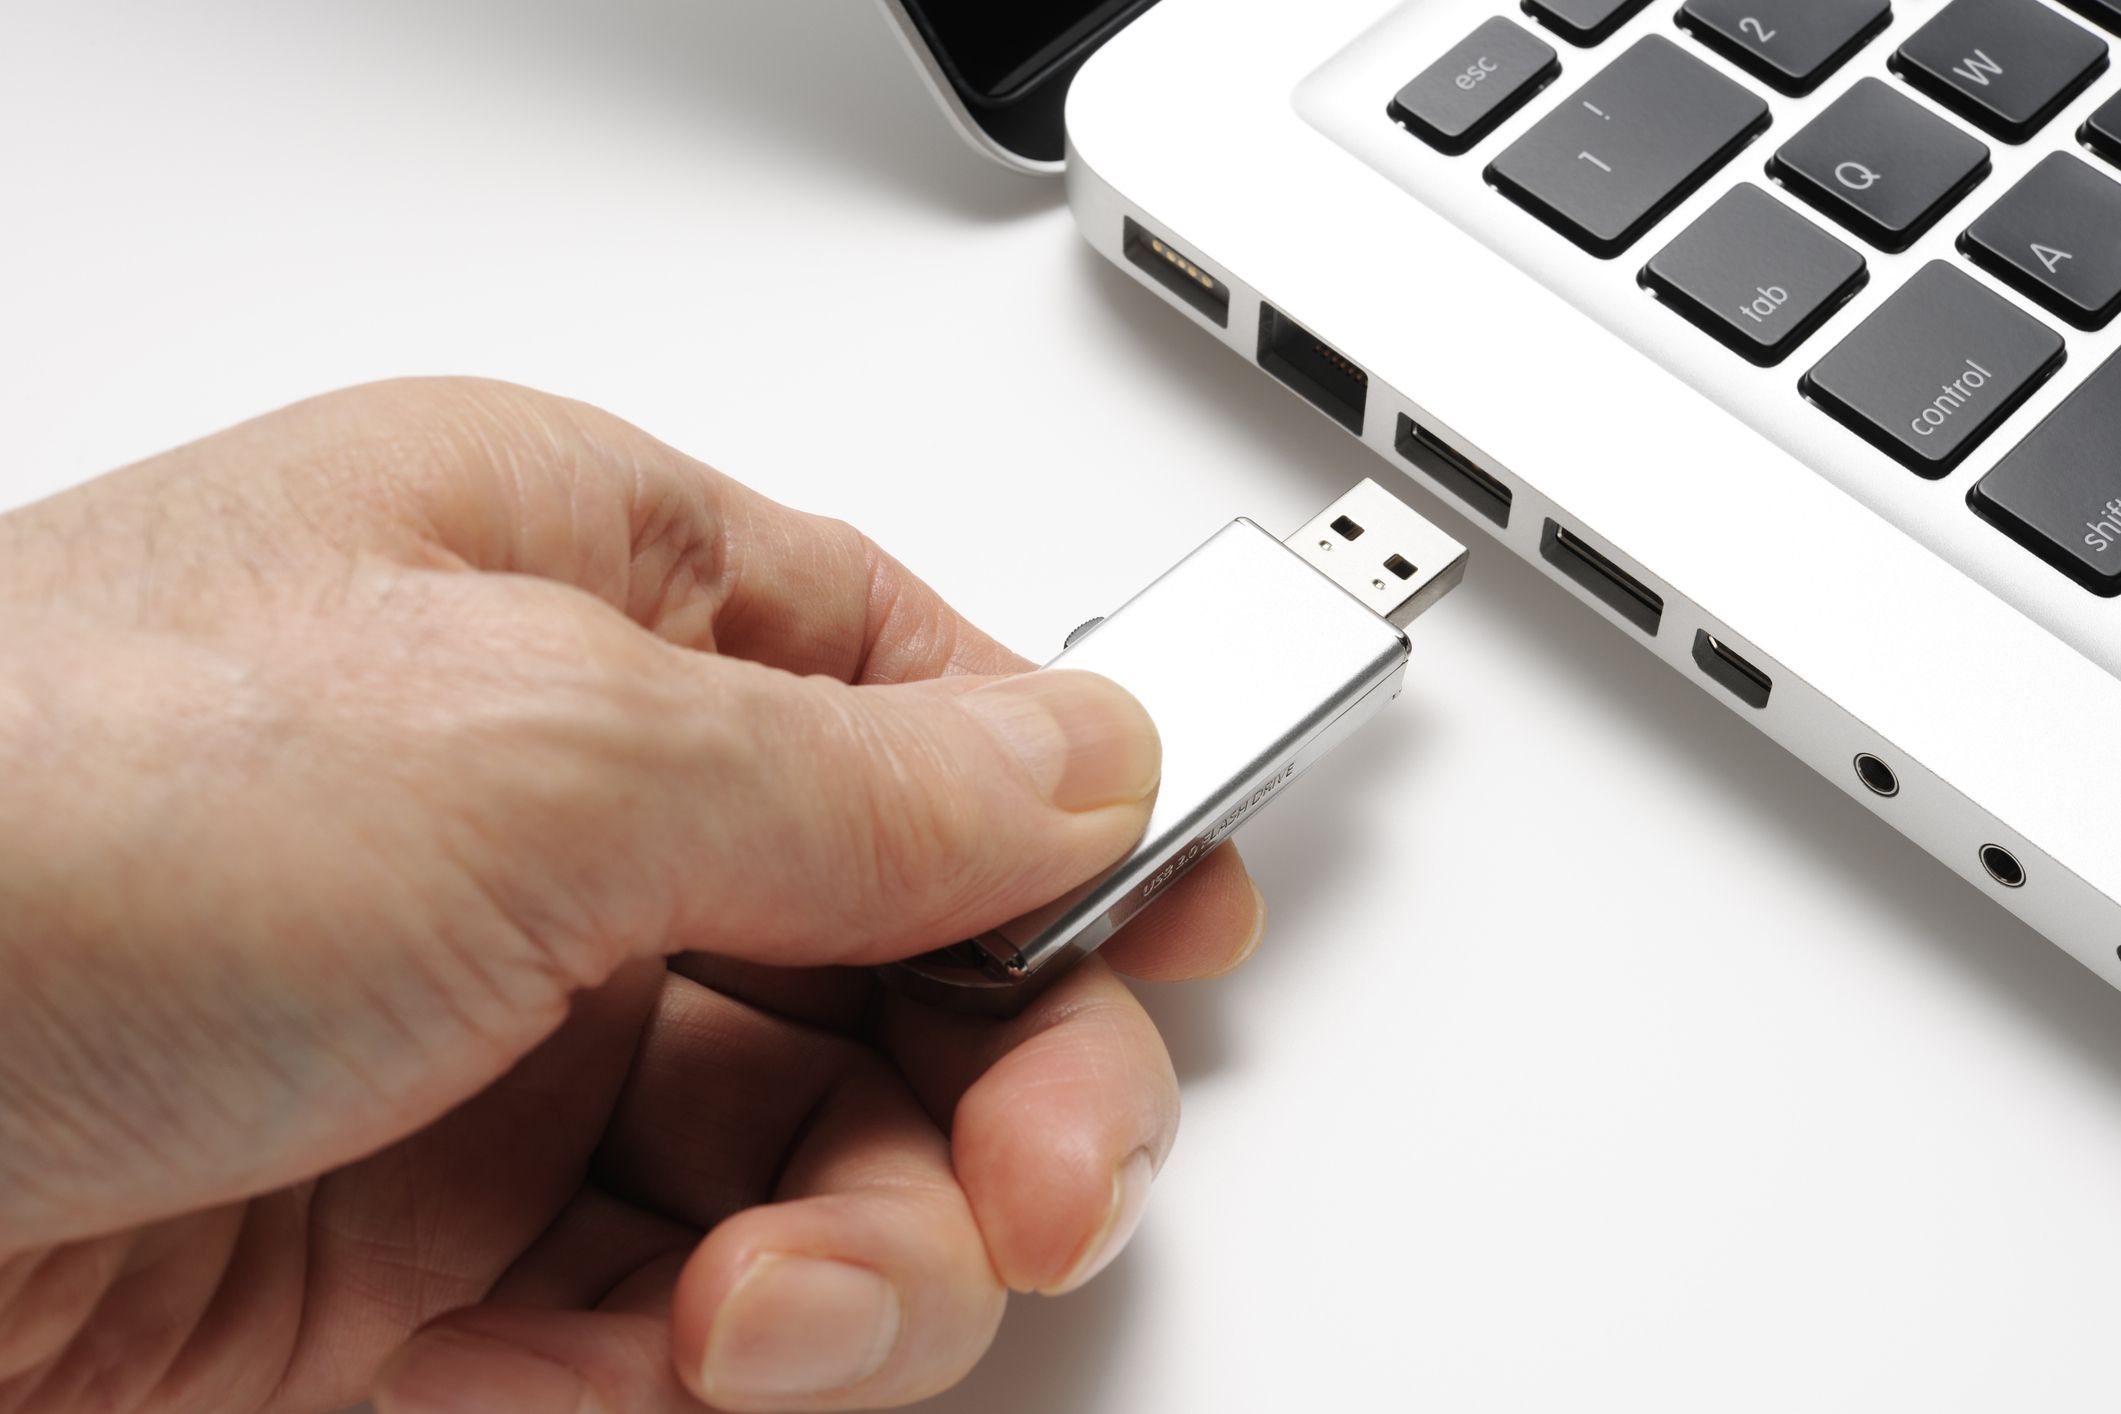 How to download music to flash drive